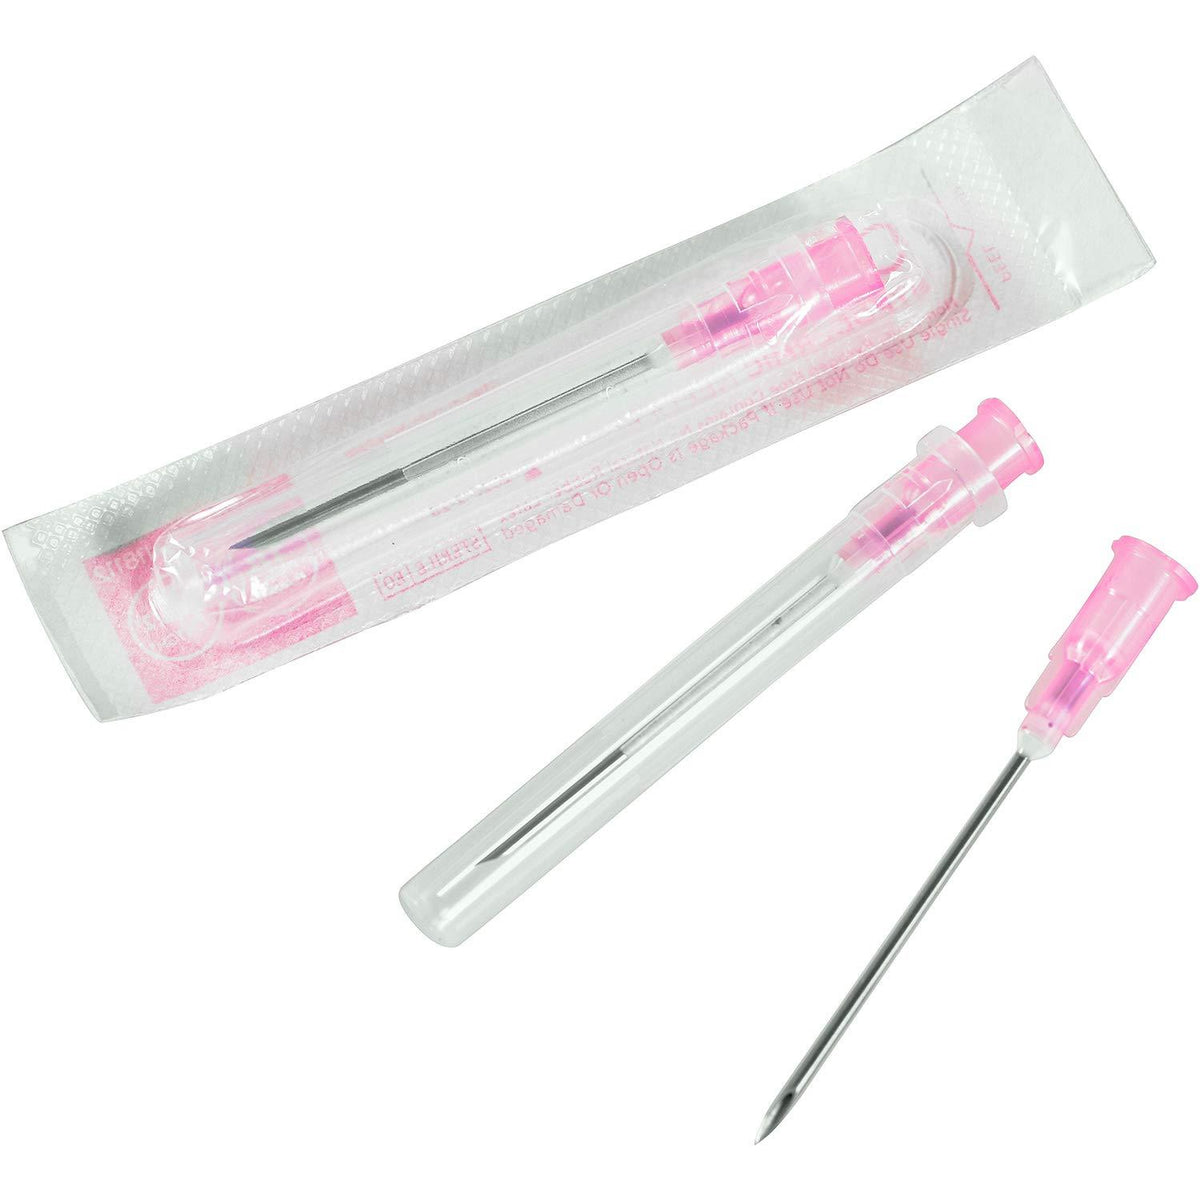 18G, 1.5 Inch Hypodermic Needle (Sterile) - The First Aid Gear Shop